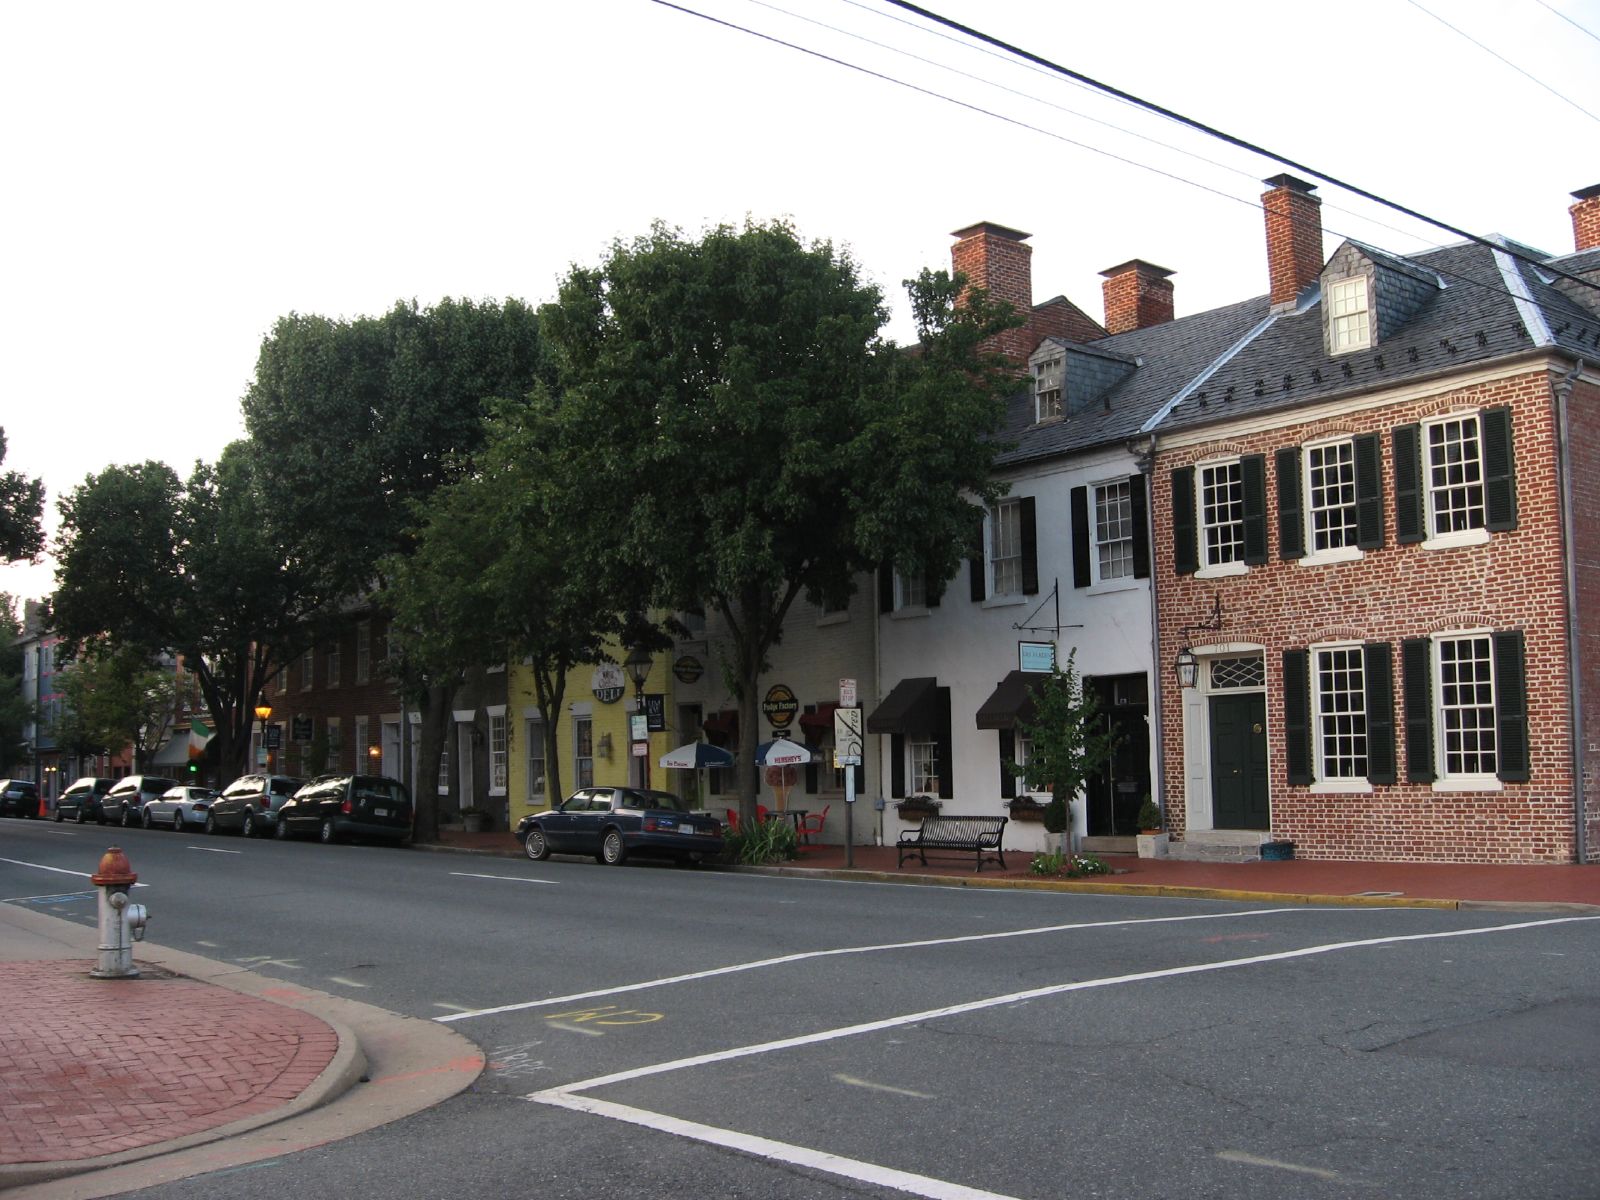 Fredericksburg is an independent city in Virginia, United States. As of the 2020 census, the population was 27,982. It is 48 miles (77 km) south of Washington, D.C., and 53 miles (85 km) north of Richmond. The Bureau of Economic Analysis of the United States Department of Commerce combines the city of Fredericksburg with neighboring Spotsylvania County for statistical purposes.
Located near where the Rappahannock River crosses the Atlantic Seaboard fall line, Fredericksburg was a prominent port in Virginia during the colonial era. During the Civil War, Fredericksburg, located halfway between the capitals of the opposing forces, was the site of the Battle of Fredericksburg and Second Battle of Fredericksburg. These battles are preserved, in part, as the Fredericksburg and Spotsylvania National Military Park. More than 10,000 African-Americans in the region left slavery for freedom in 1862 alone, getting behind Union lines. Tourism is a major part of the economy. Approximately 1.5 million people visit the Fredericksburg area annually, including the battlefield park, the downtown visitor center, events, museums, art shops, galleries, and many historical sites.Fredericksburg is home to Central Park (as of 2004, the second-largest mall on the East Coast). The Spotsylvania Towne Centre is located in Spotsylvania County, adjacent to the city. Major employers include the University of Mary Washington (named for the mother of George Washington, who lived here), Mary Washington Healthcare, and GEICO. Many Fredericksburg area residents commute to work by car, bus, and rail to Washington, D.C., and Richmond, as well as Fairfax, Prince William, and Arlington counties.